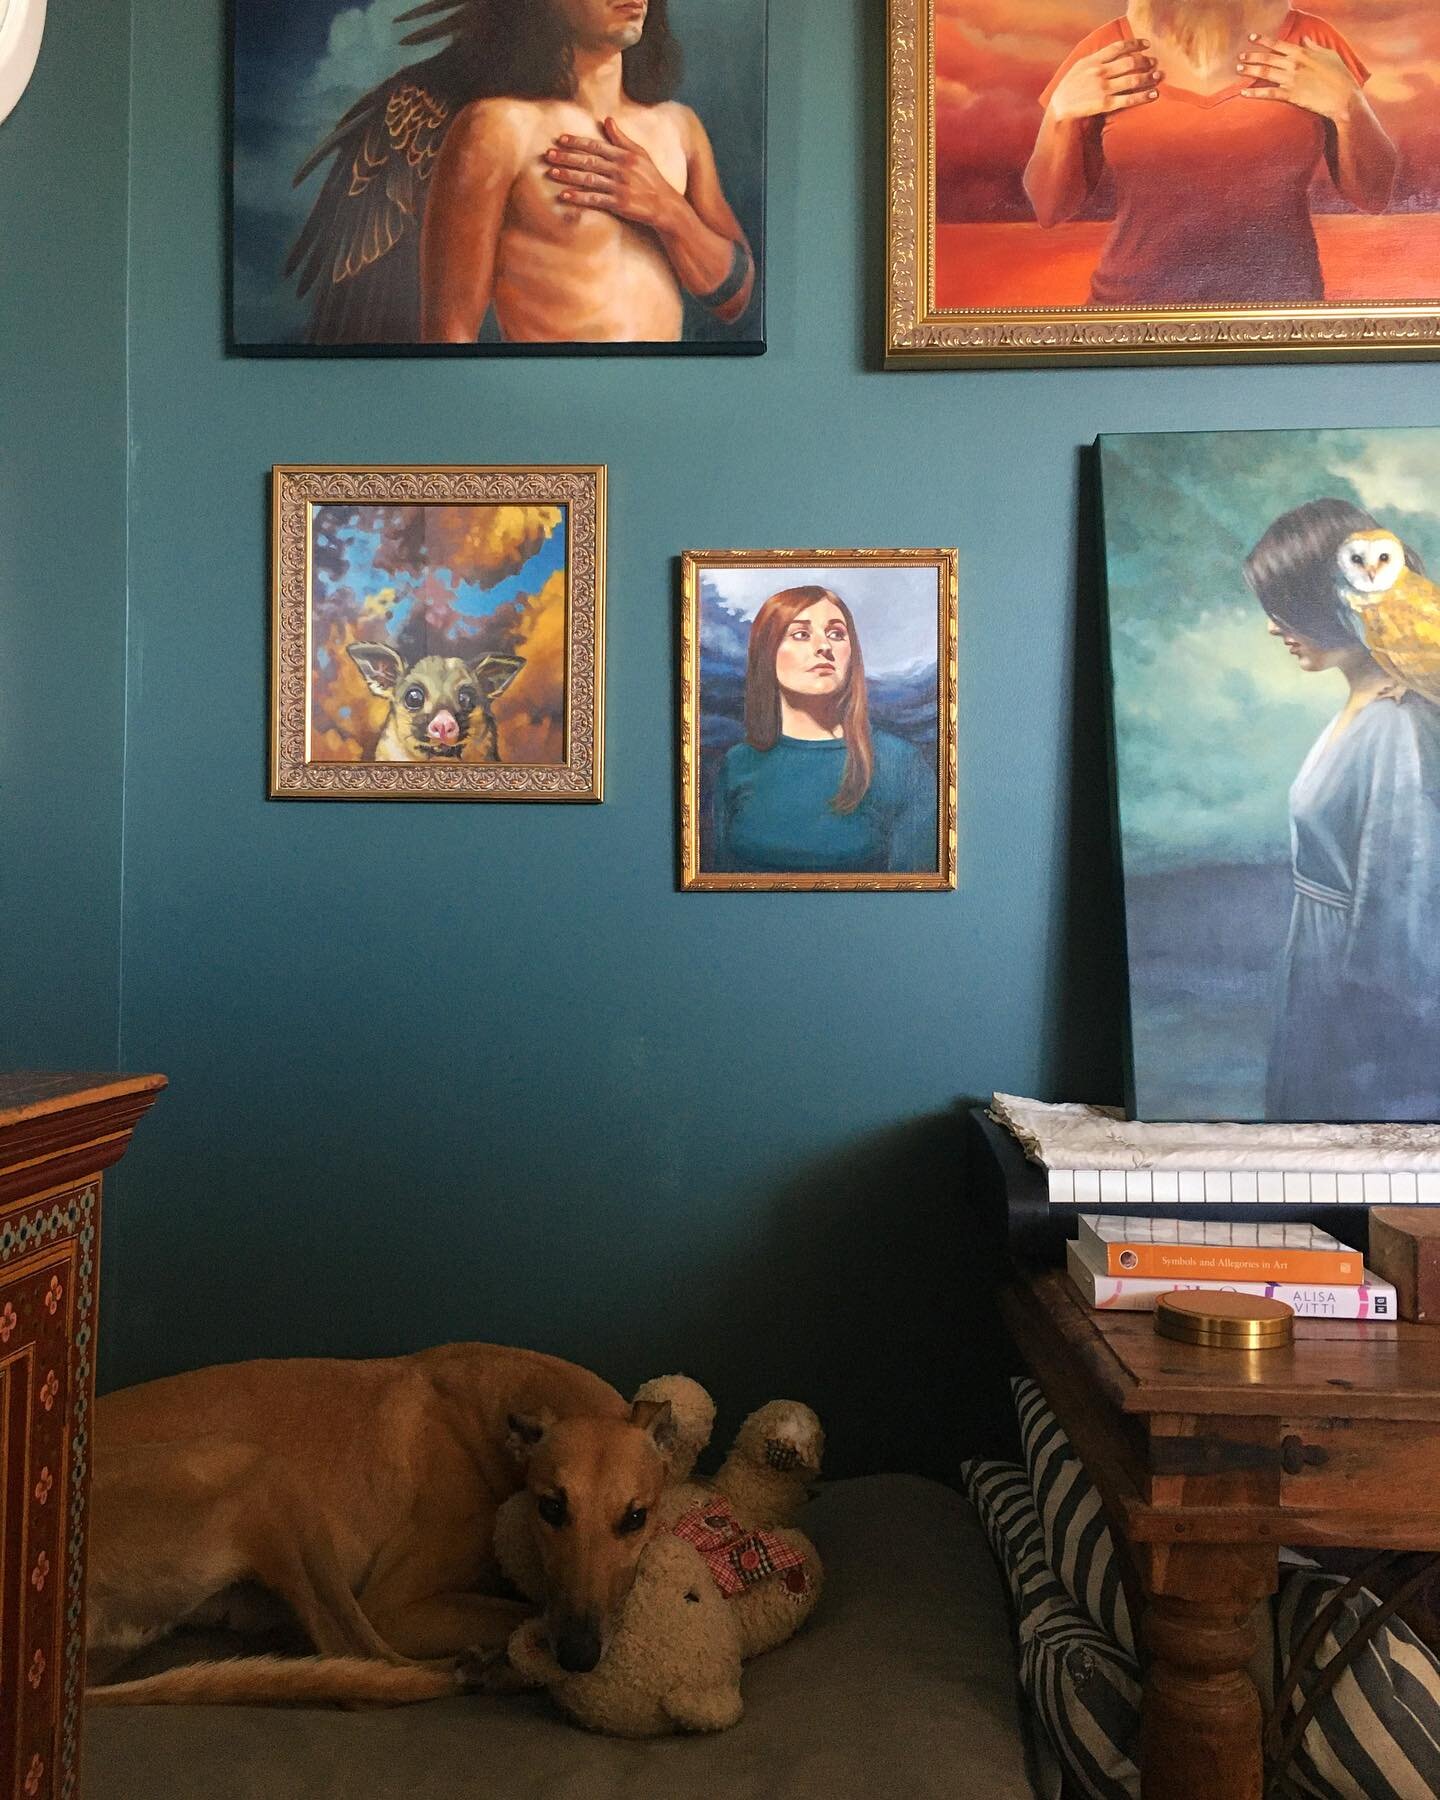 Millie and friend  in her sleepy time nook under the gallery wall. 🤍

#gallerywall #greyhound #artyhomes #wallart #eclecticstyle #furbaby #creativespaces #artisthome #homegallery #maximalistinteriors #maximalism #cozyhome @gumtreegreys